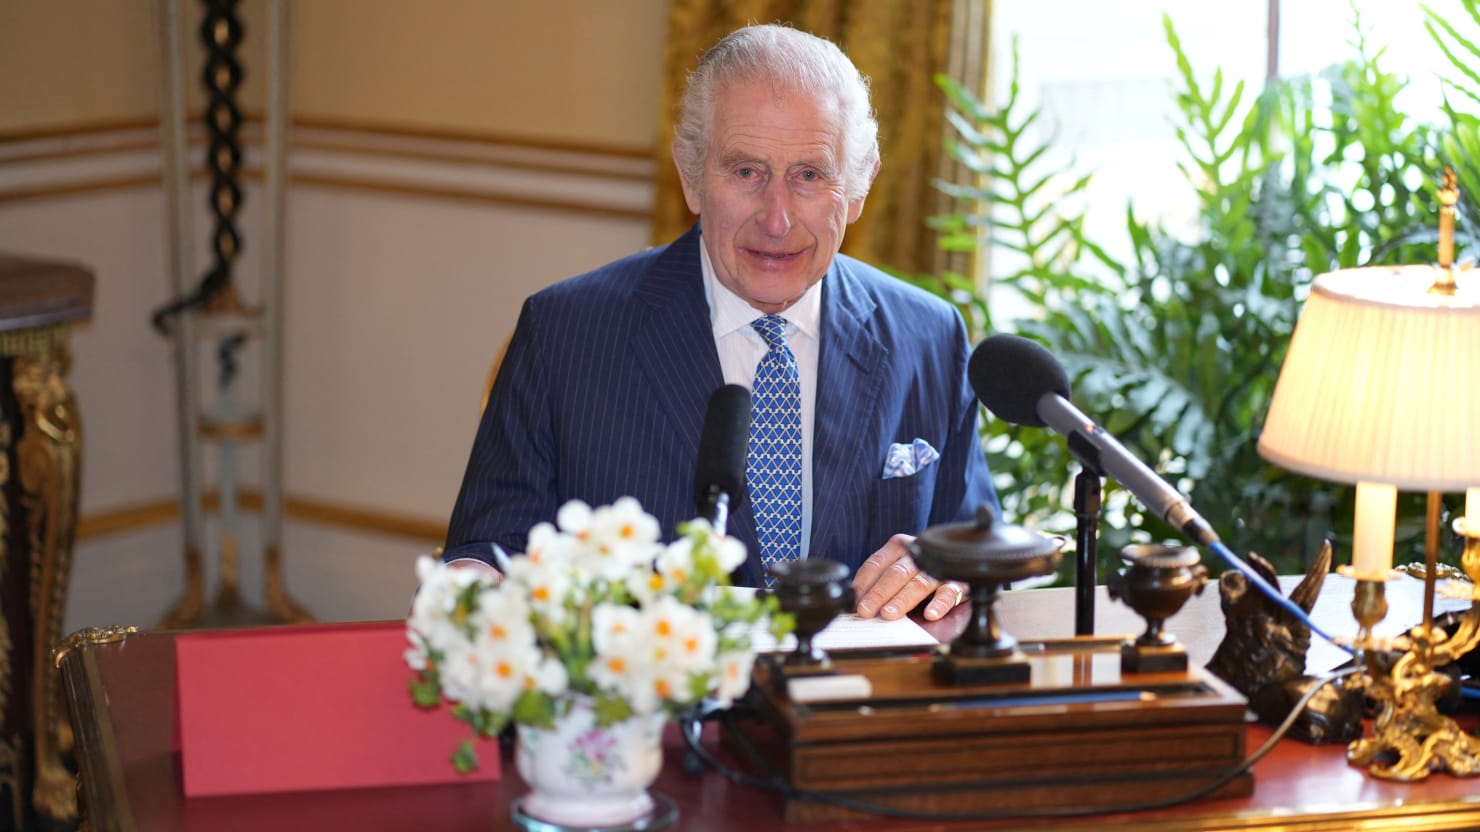 The Palace releases a new portrait of King Charles before Easter